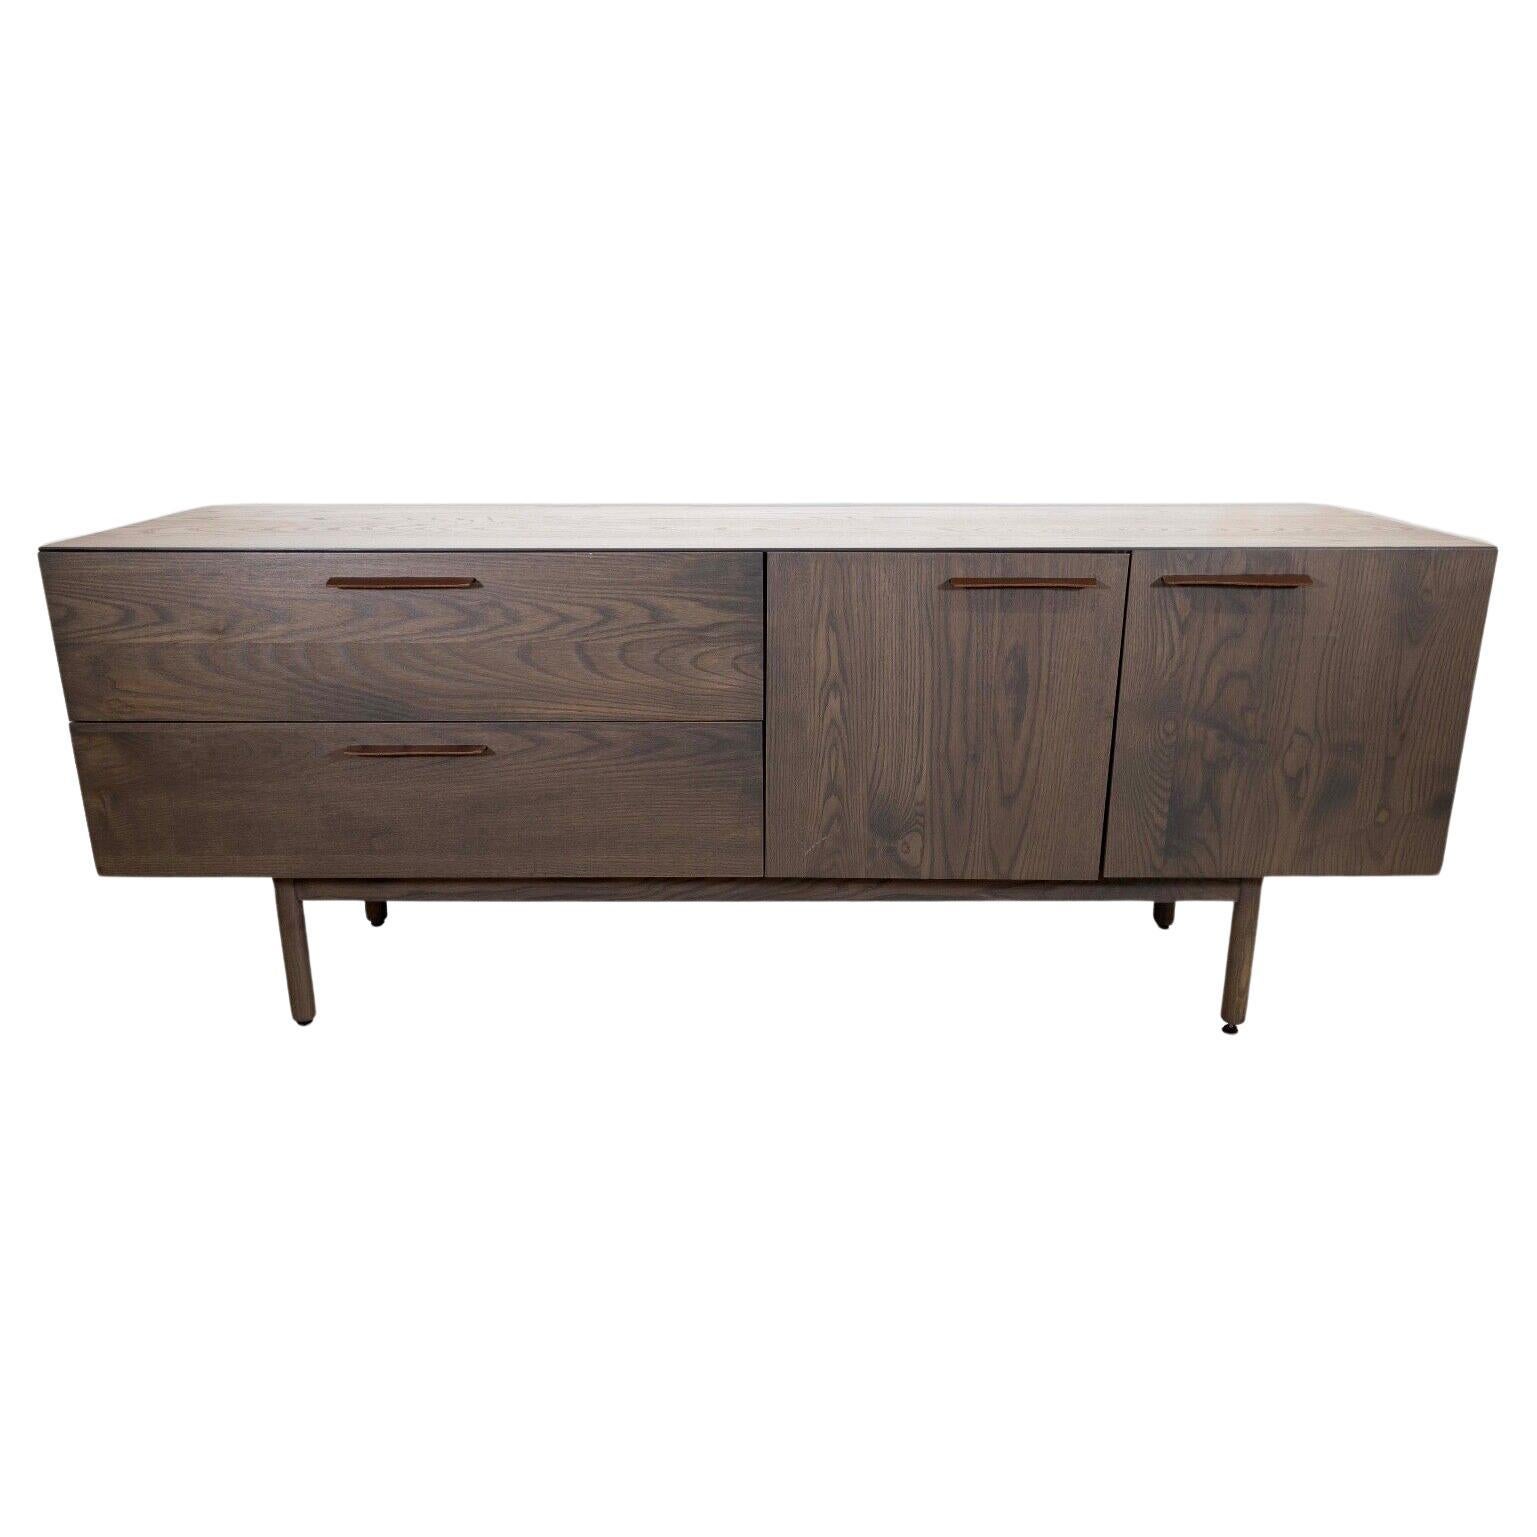 Blu Dot Shale 2 Drawer 2 Door Console Credenza Sideboard Contemporary Modern For Sale